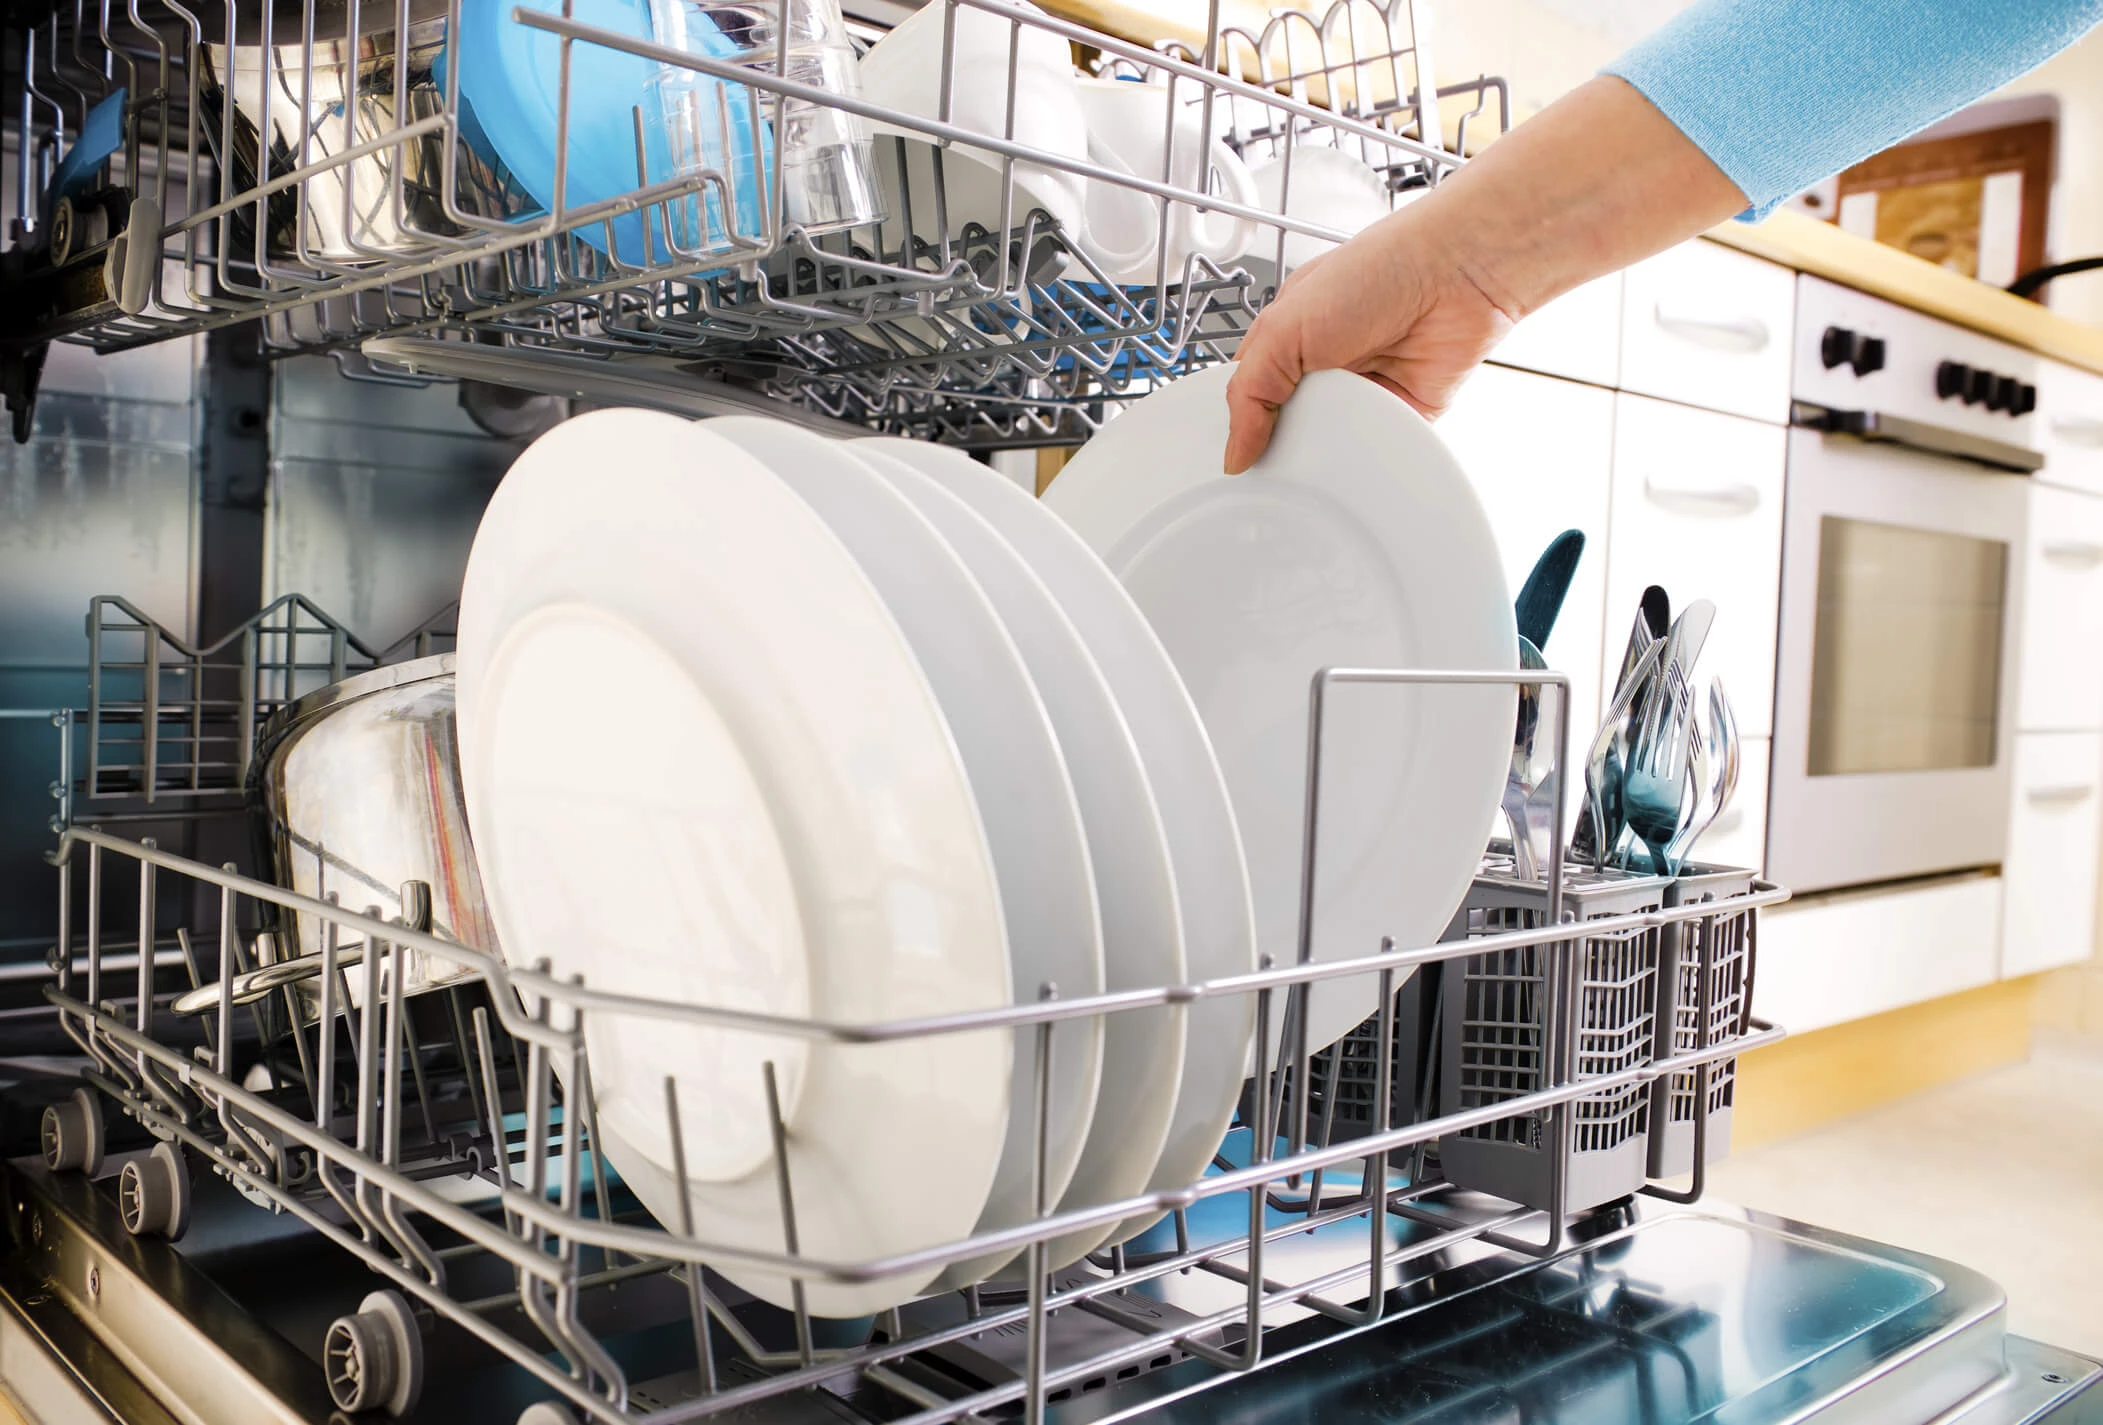 How to clean your dishwasher